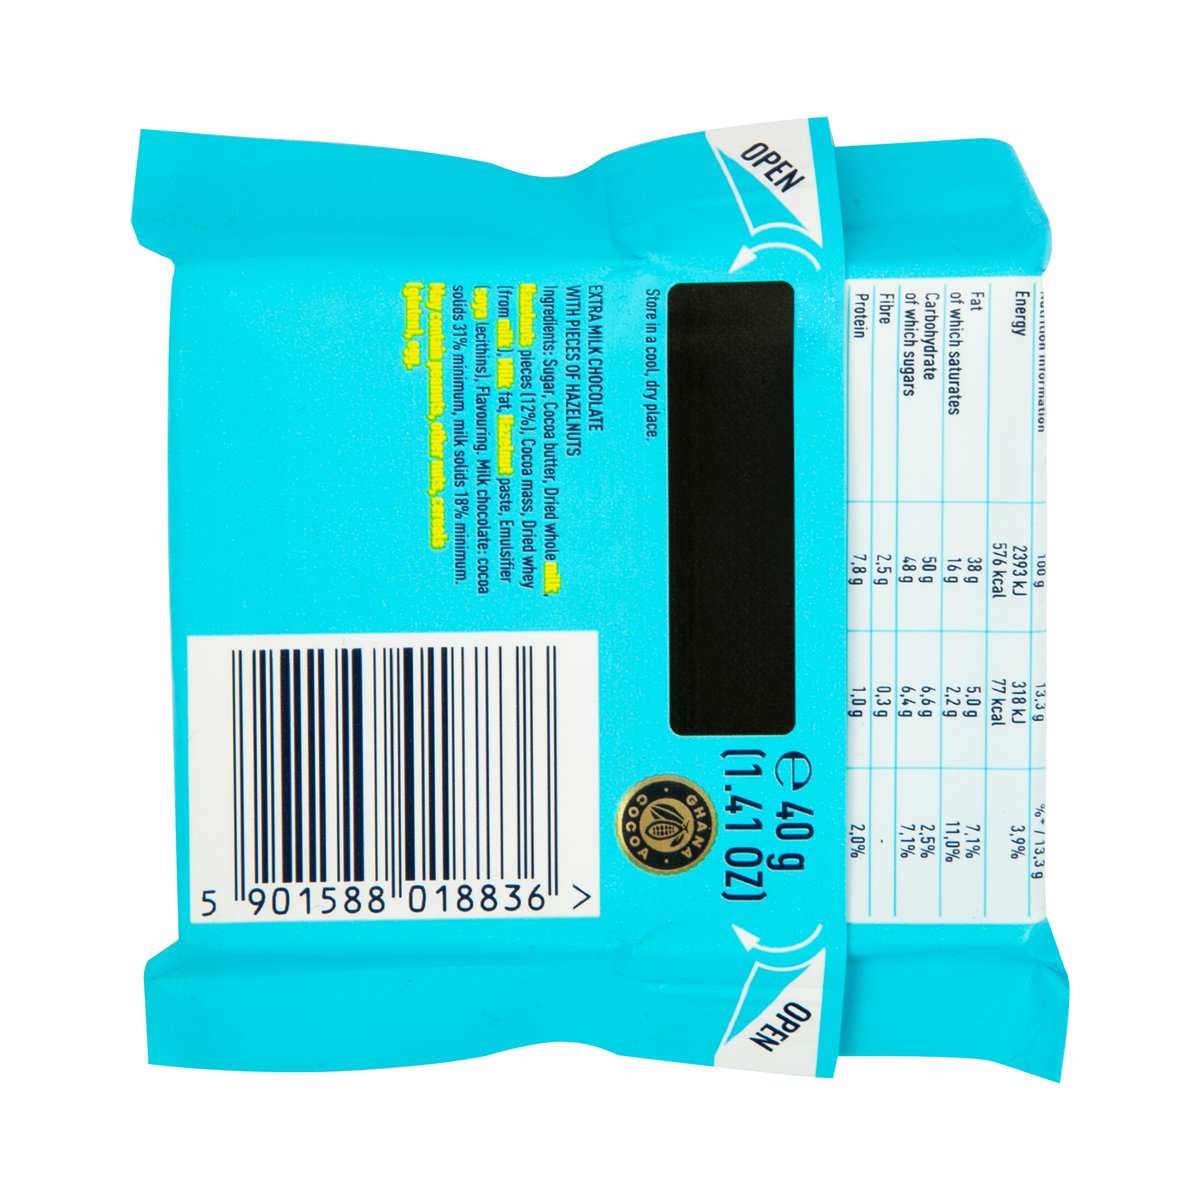 E.Wedel Extra Milk Chocolate with Pieces of Hazenuts 40 g